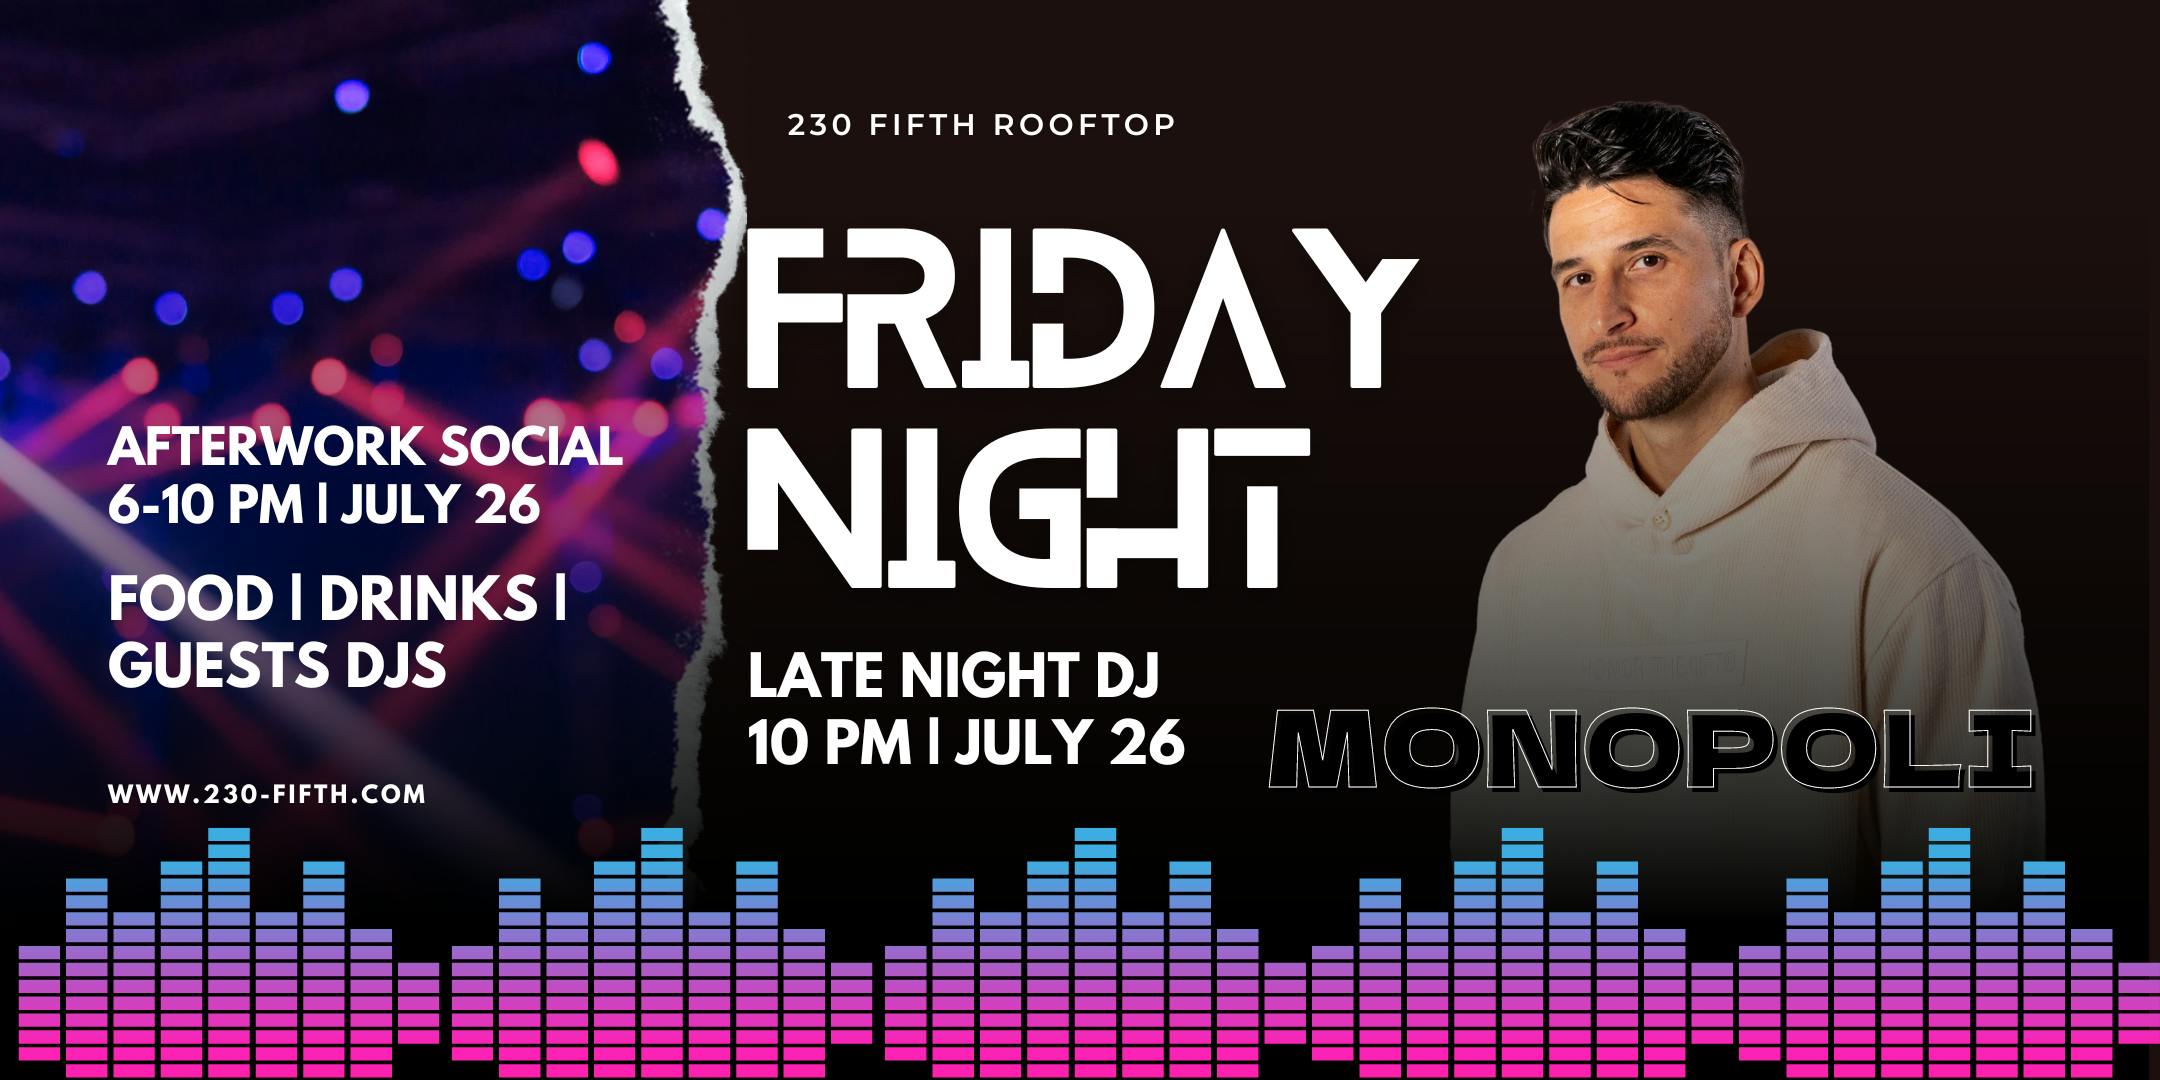 FRIDAY NIGHT Dance Party @230 Fifth Rooftop